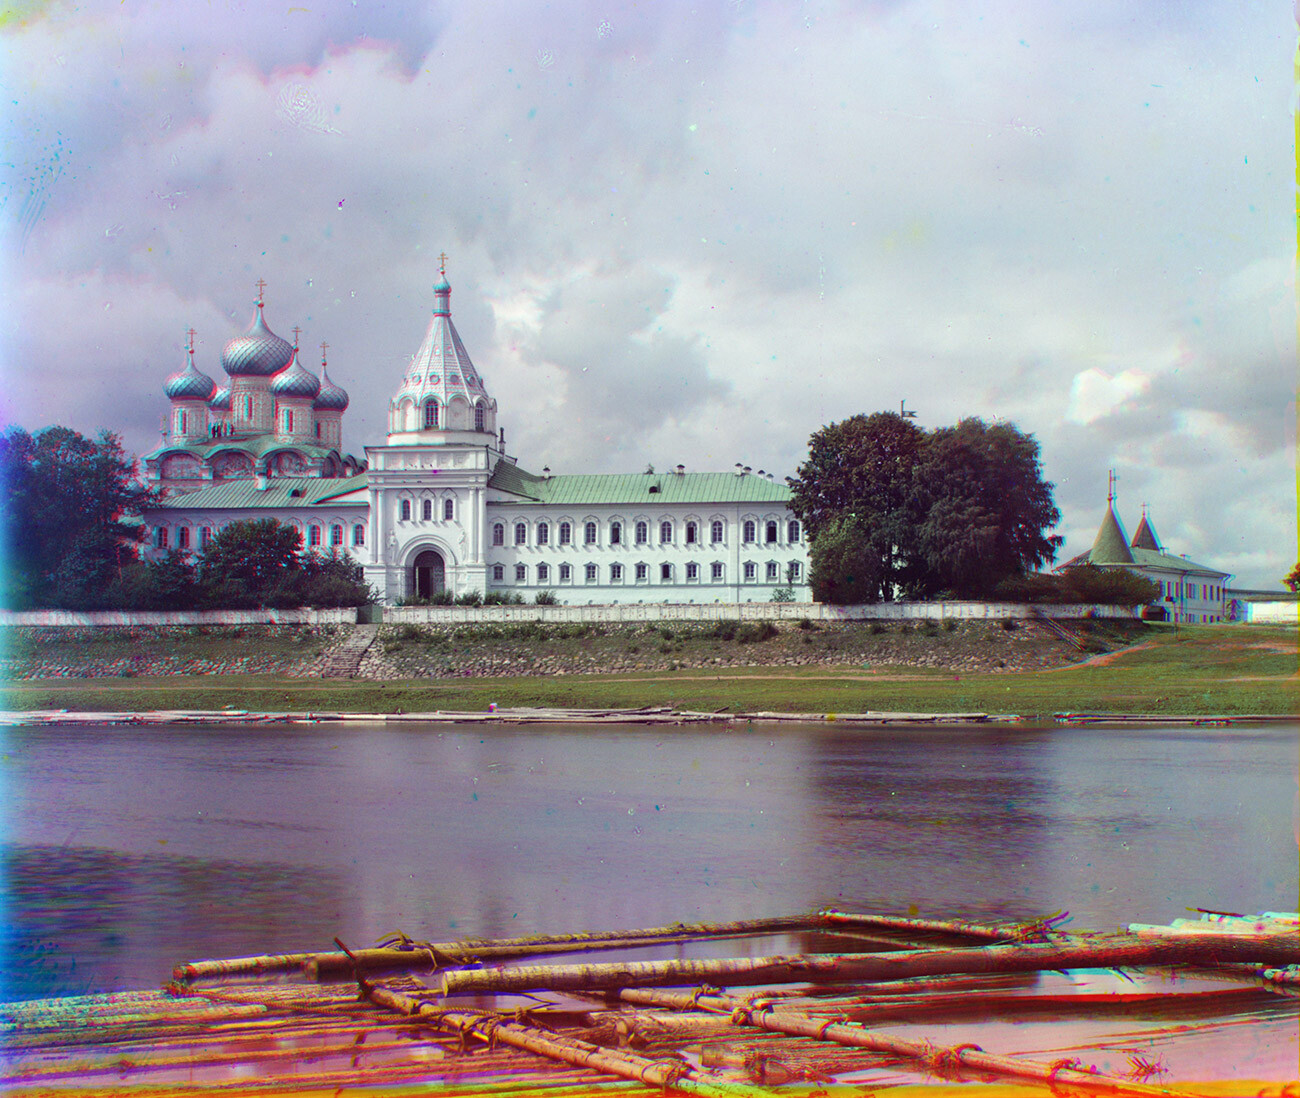 Trinity-Ipatiev Monastery, east view across Kostroma River. From left: Trinity Cathedral; bell tower; Archbishop's Cloisters with Gate Church of Sts. Chrysanthus & Daria; Powder Tower. Summer 1911